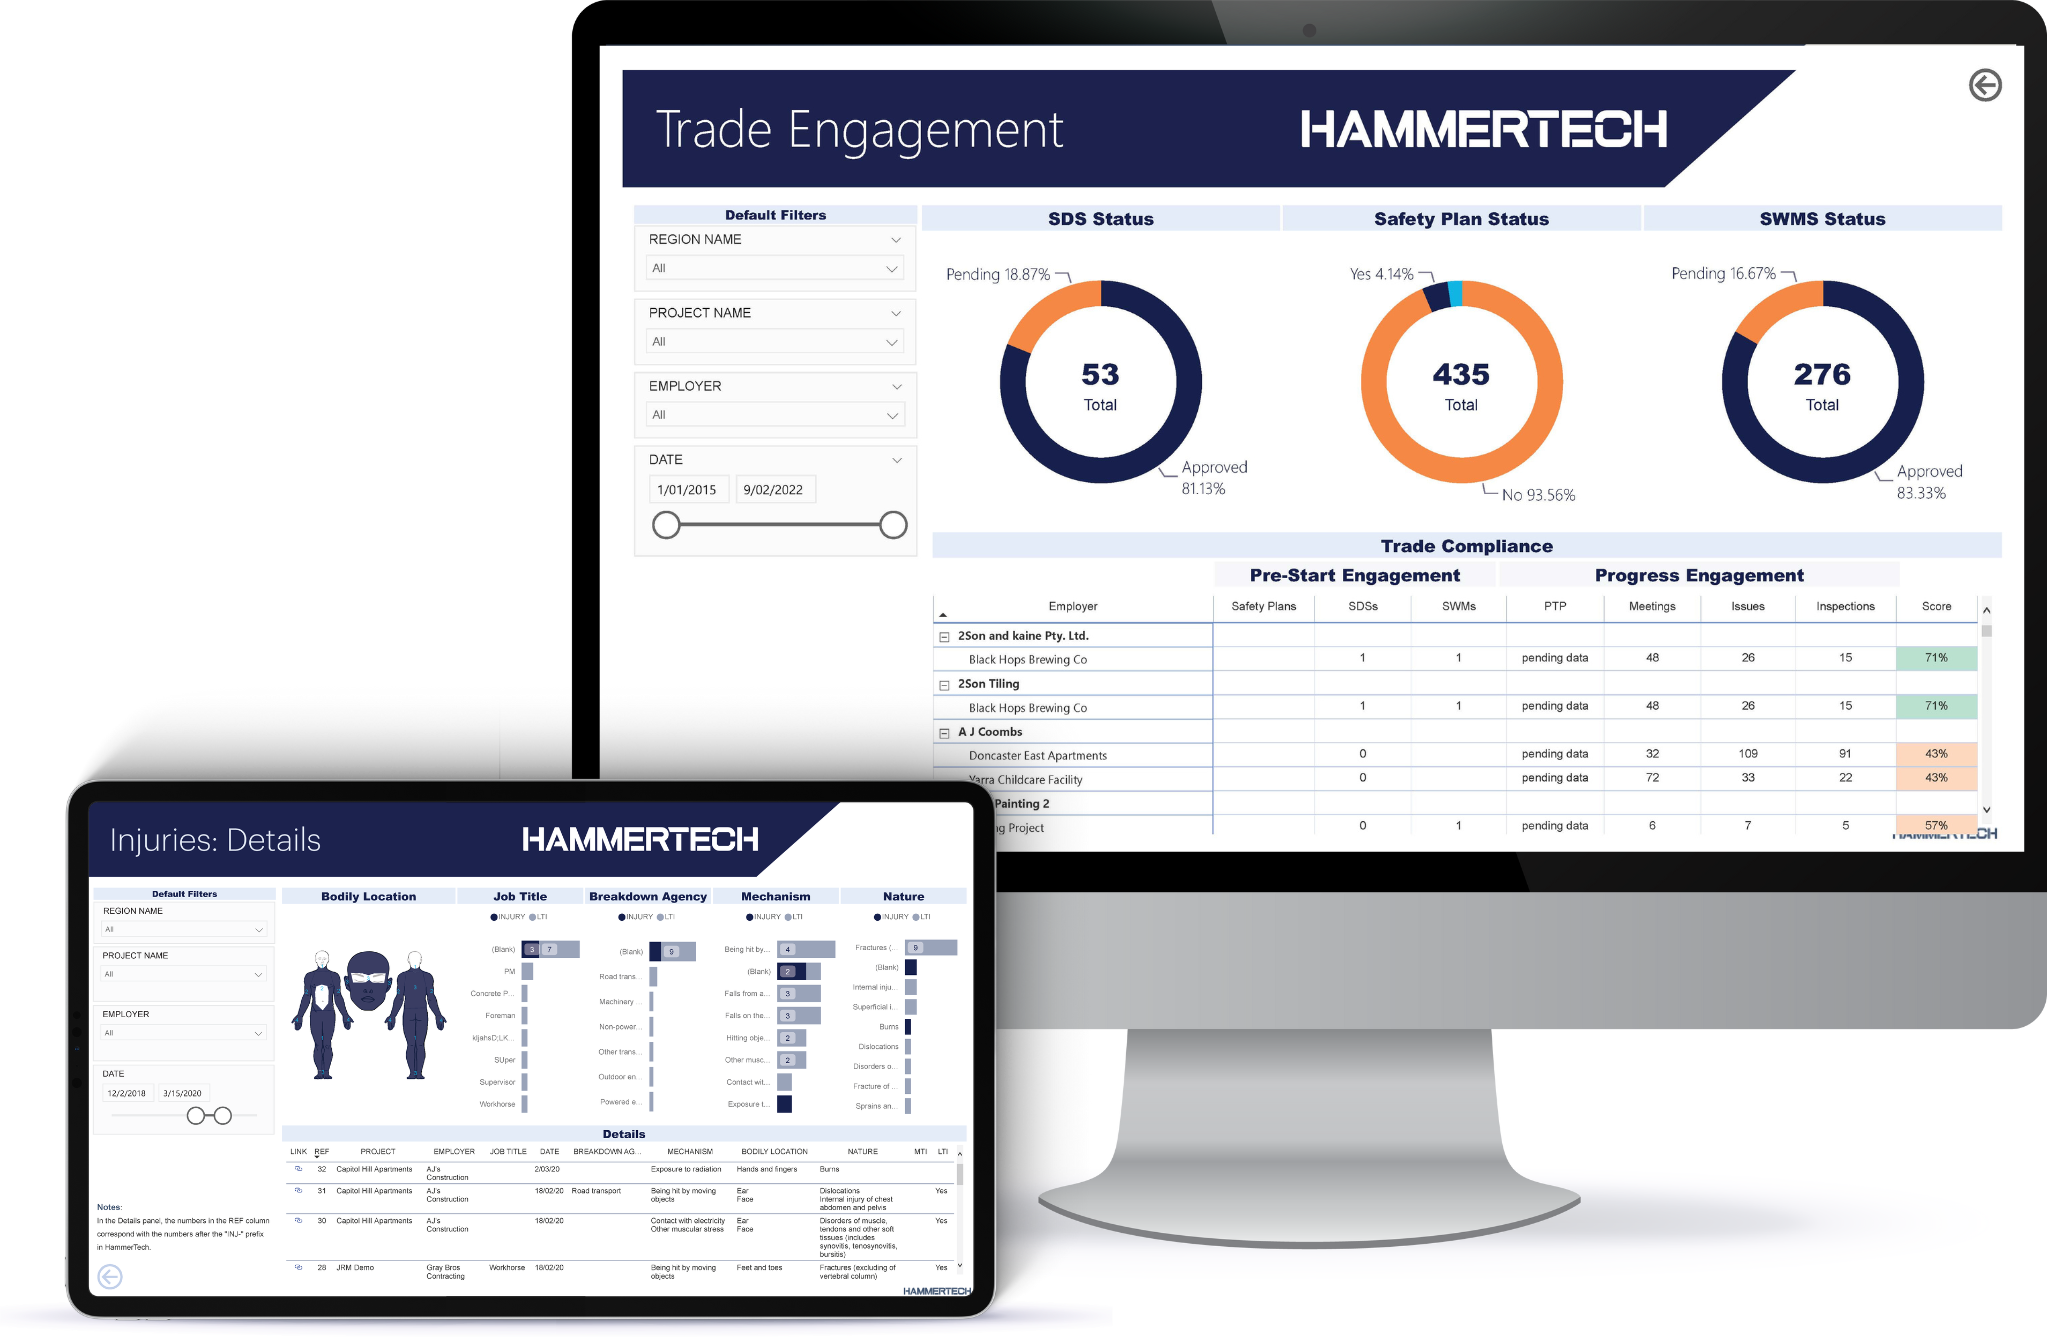 Computer and tablet displaying trade engagement metrics and detailed injury reports on HammerTech's EHS safety platform, enabling comprehensive on-site safety management and business intelligence reporting.